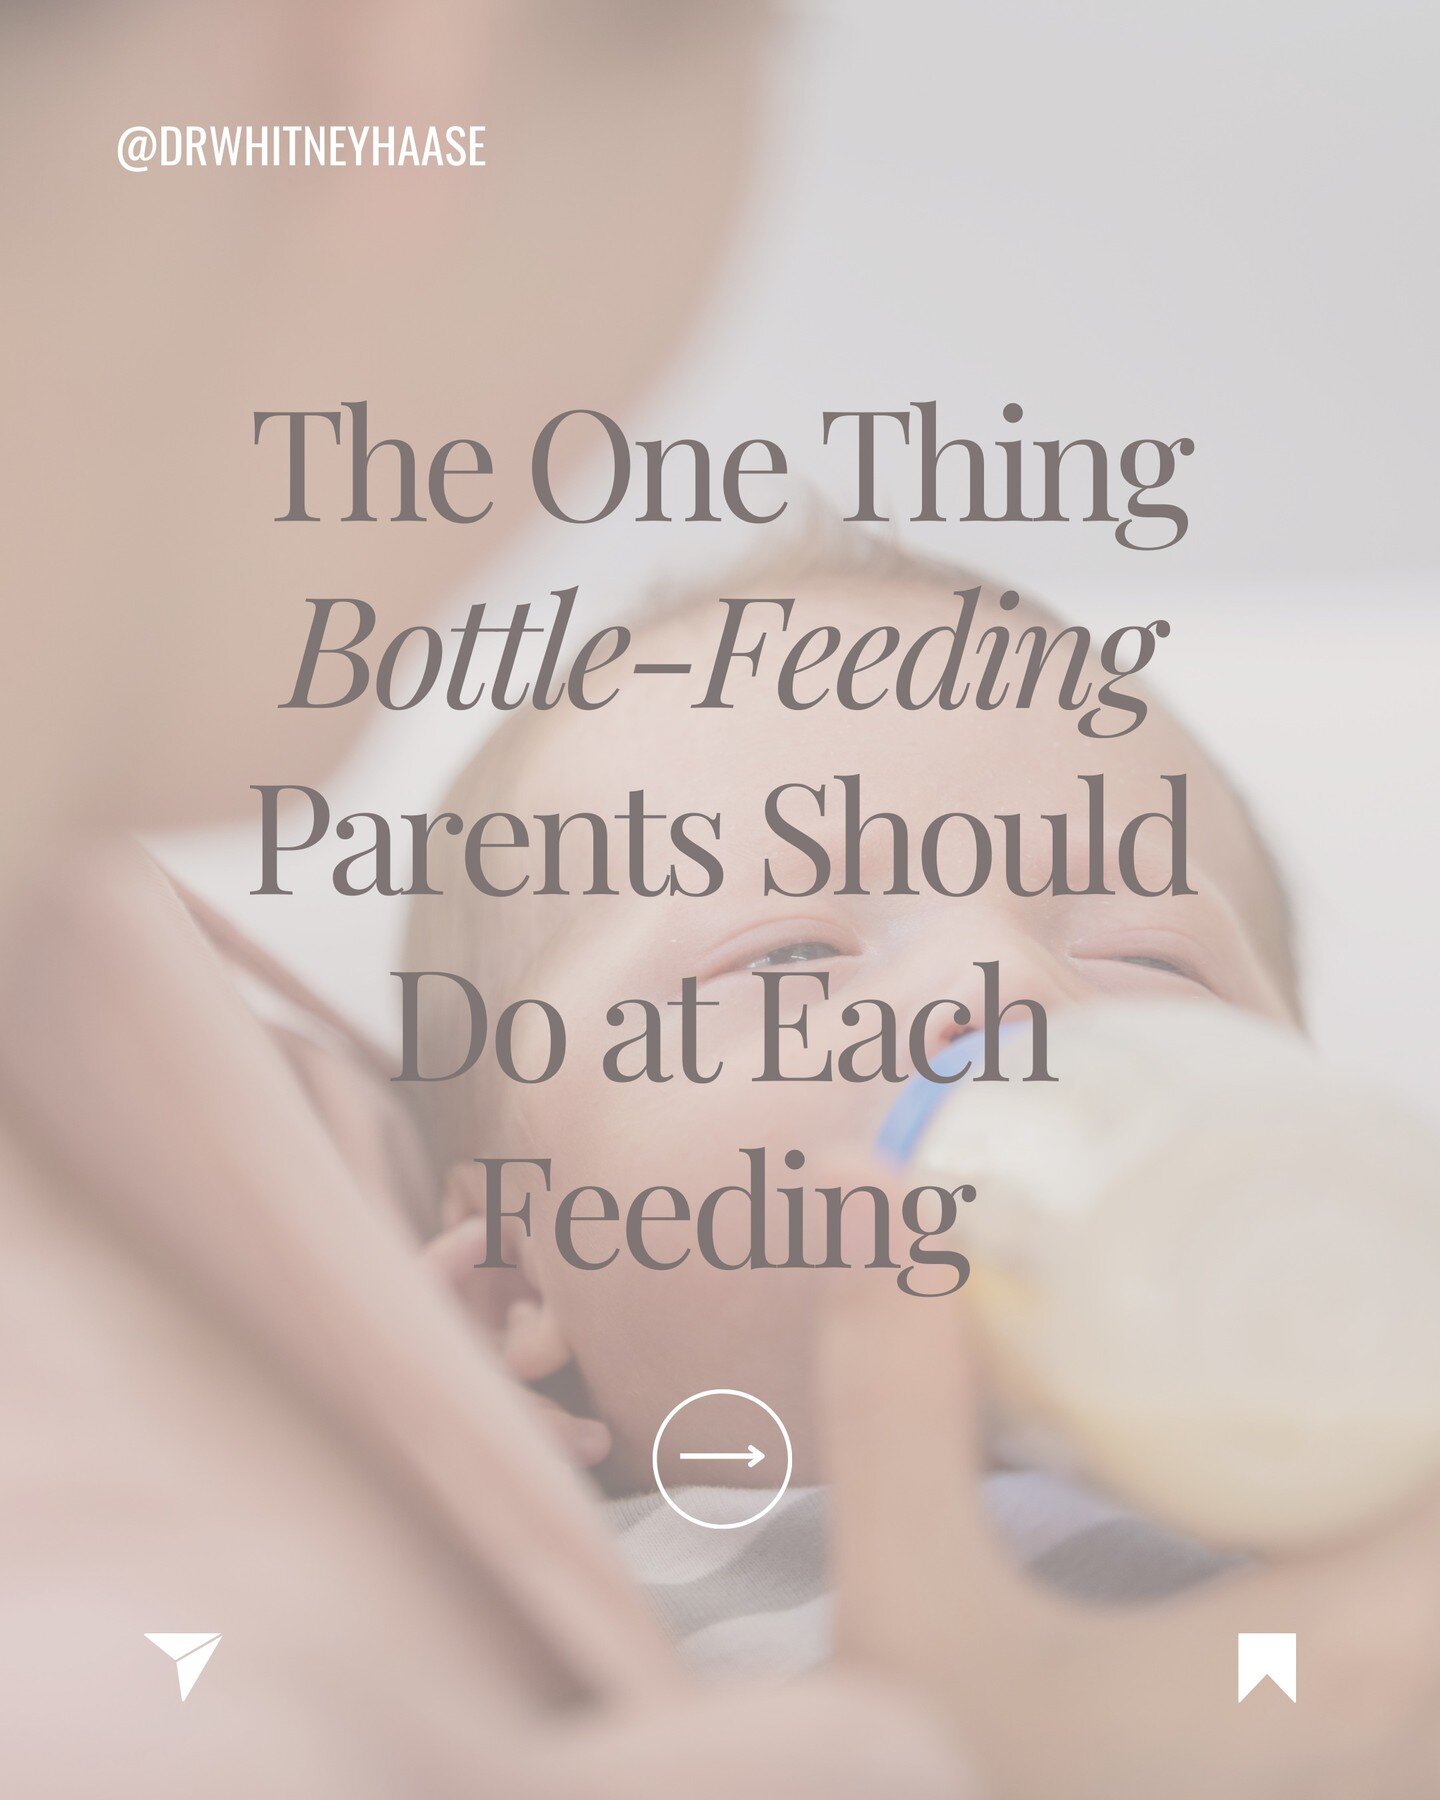 I posted a few weeks ago about breast feeding positions, but breastfeeding isn't always an option. So, bottle feeding parents -- this one's for you!

Humans love habits, and some habits are so ingrained in our routine that we aren't even aware that w